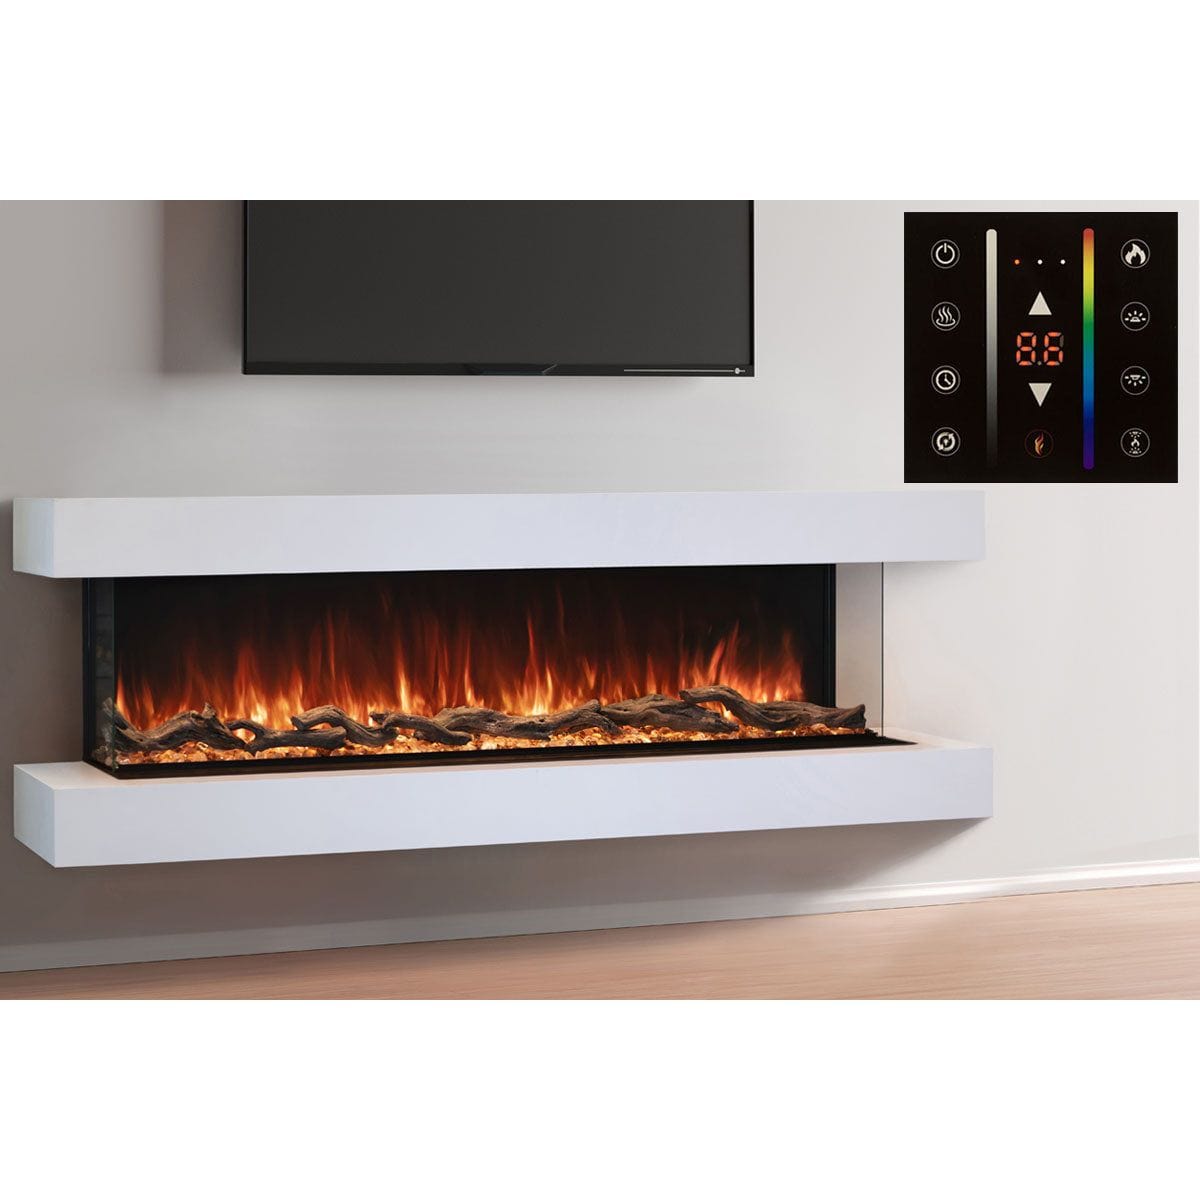 Modern Flames Modern Flames Landscape Pro 82'' Electric Fireplace Wall Mount Studio Suite | White Ready to Paint Multi-Side View Electric Fireplace Thermostat & Wall Control & Remote LPM-6816 / WMC-68LPM-RTF / TH-WTC/LP